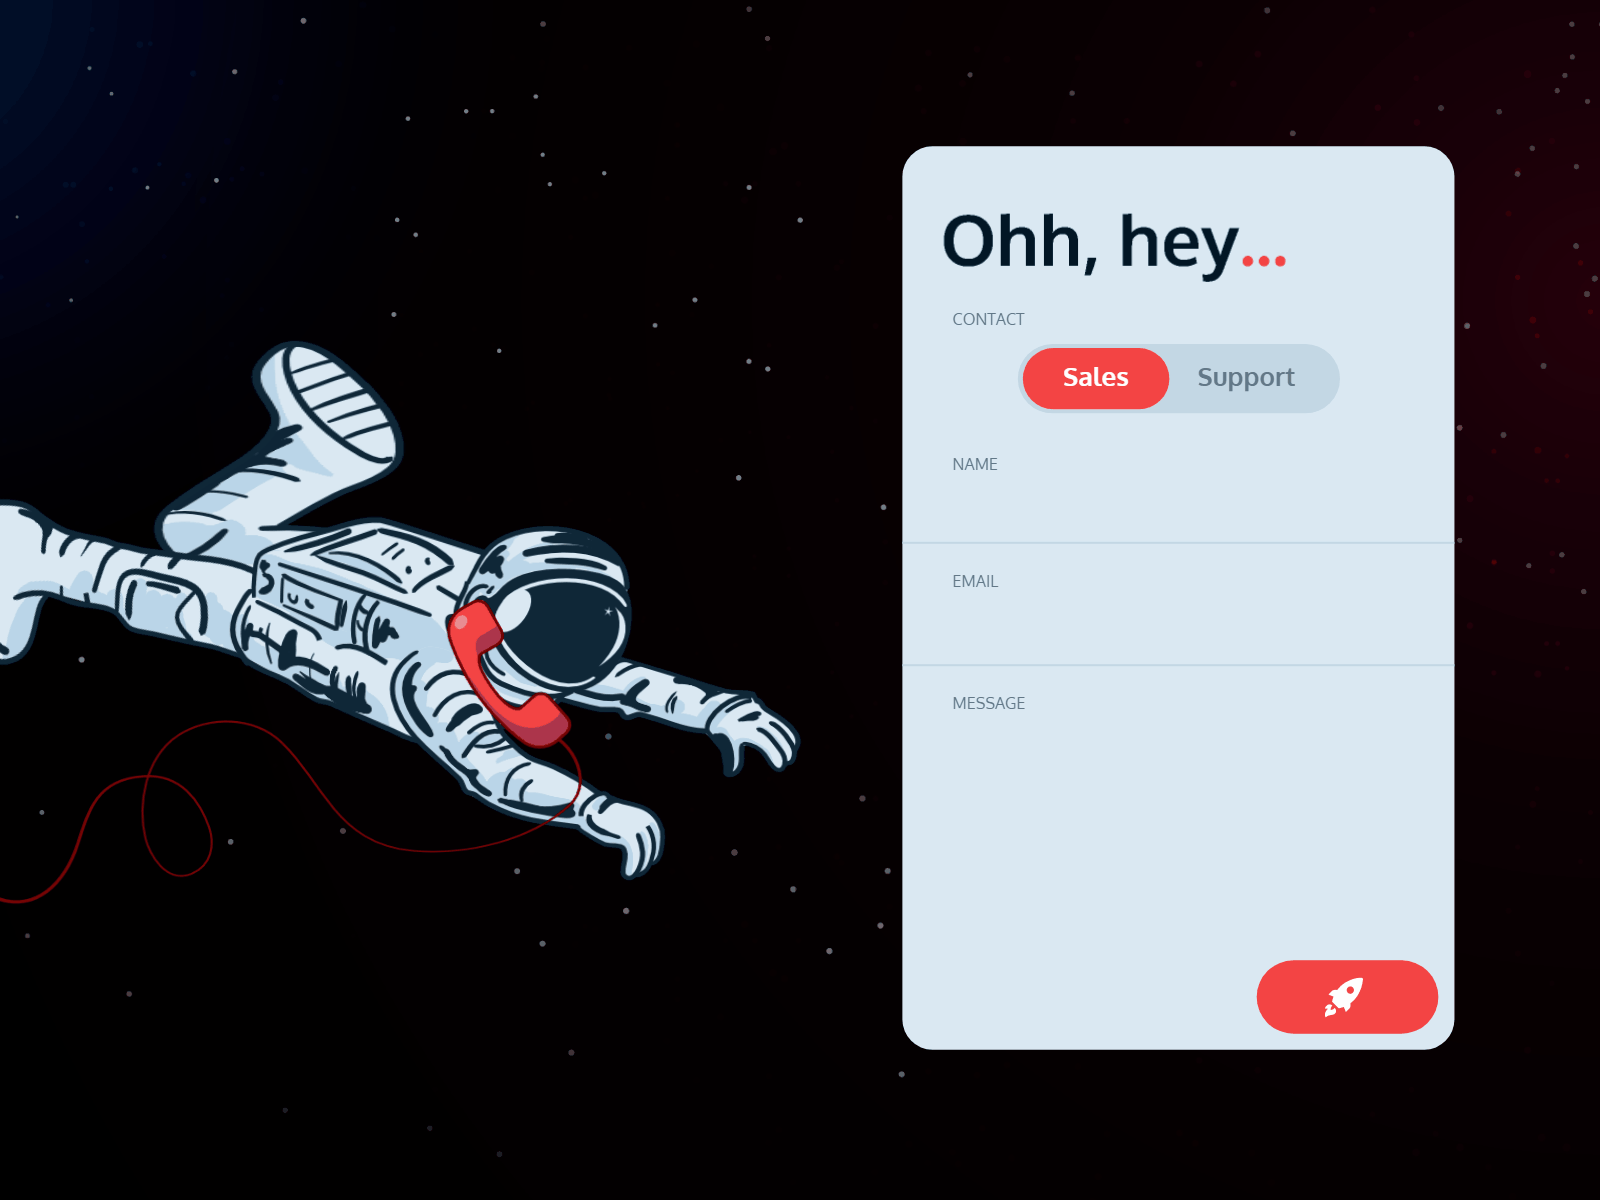 Daily UI Challenge #28 - Contact us